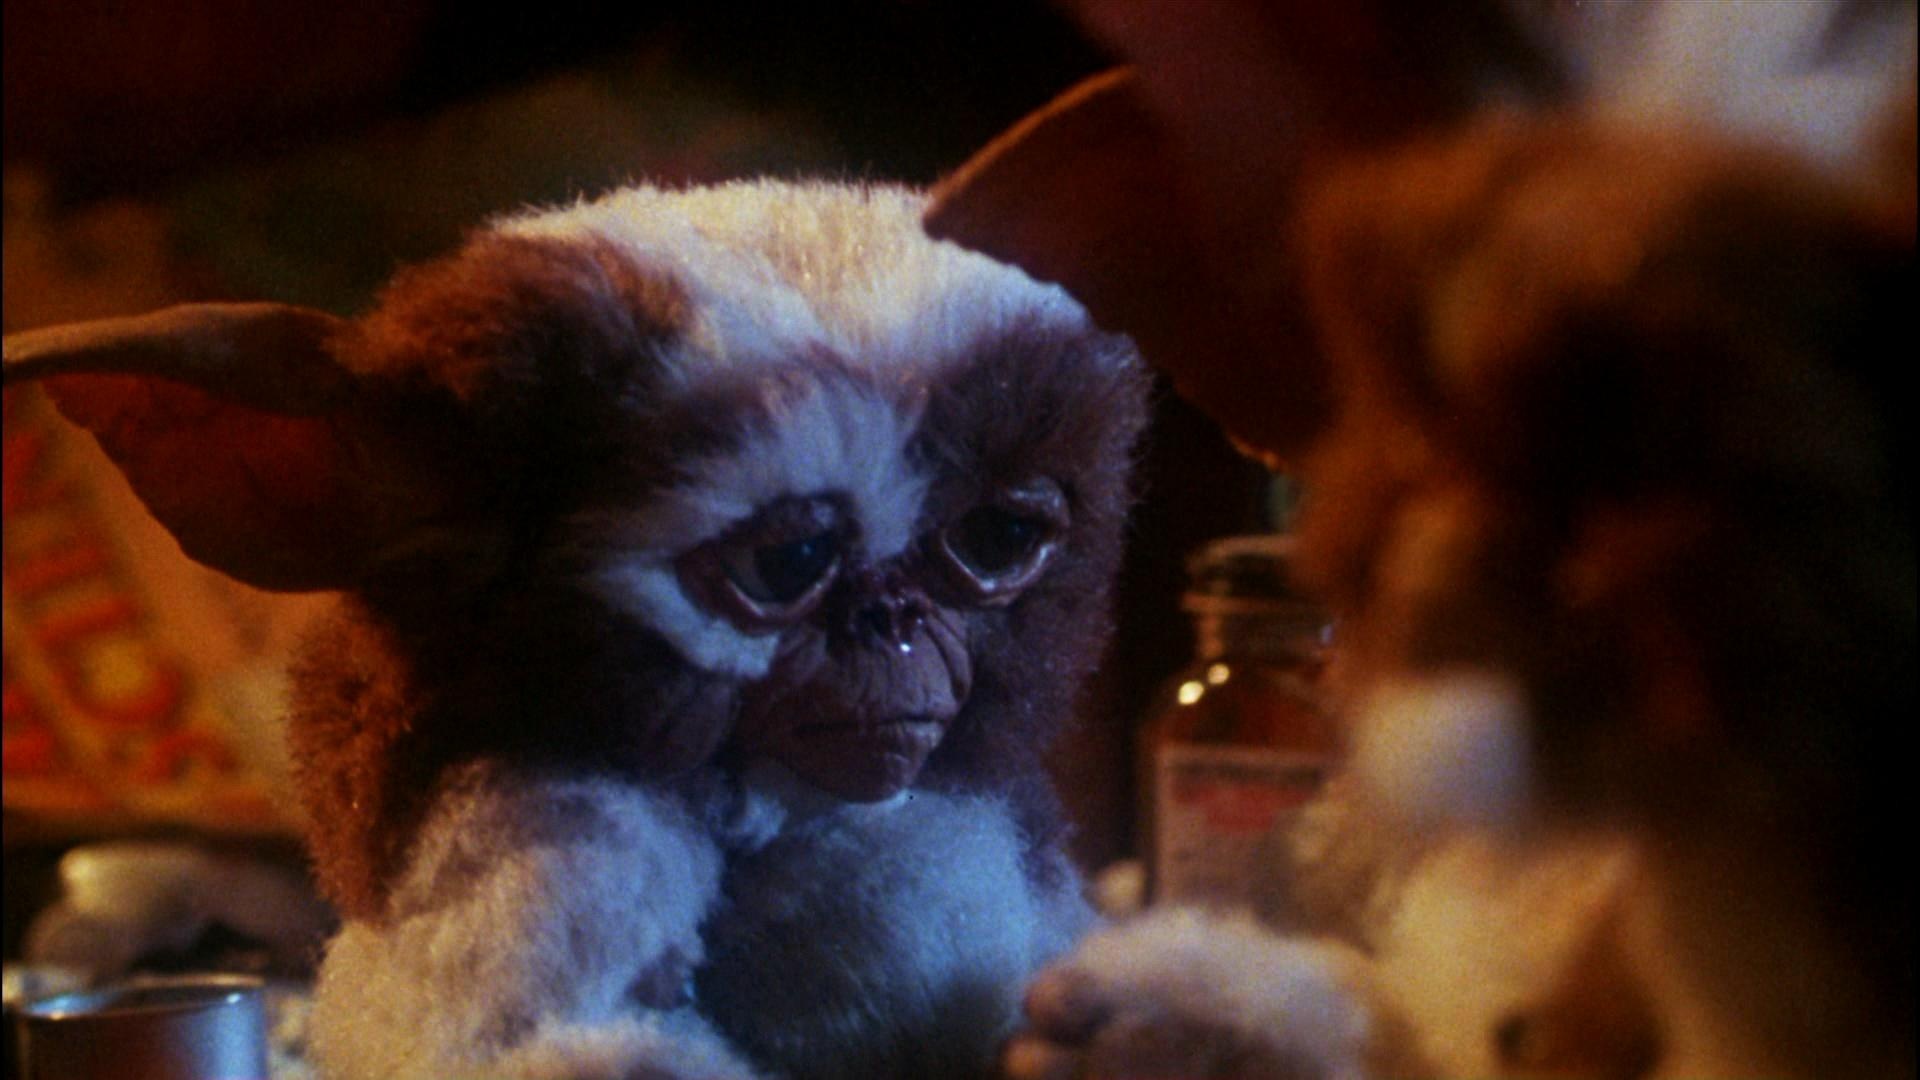 Gremlin Gizmo: The infamous cute, kind, lovable, adorable Mogwai, A name that means a gadget. 1920x1080 Full HD Wallpaper.